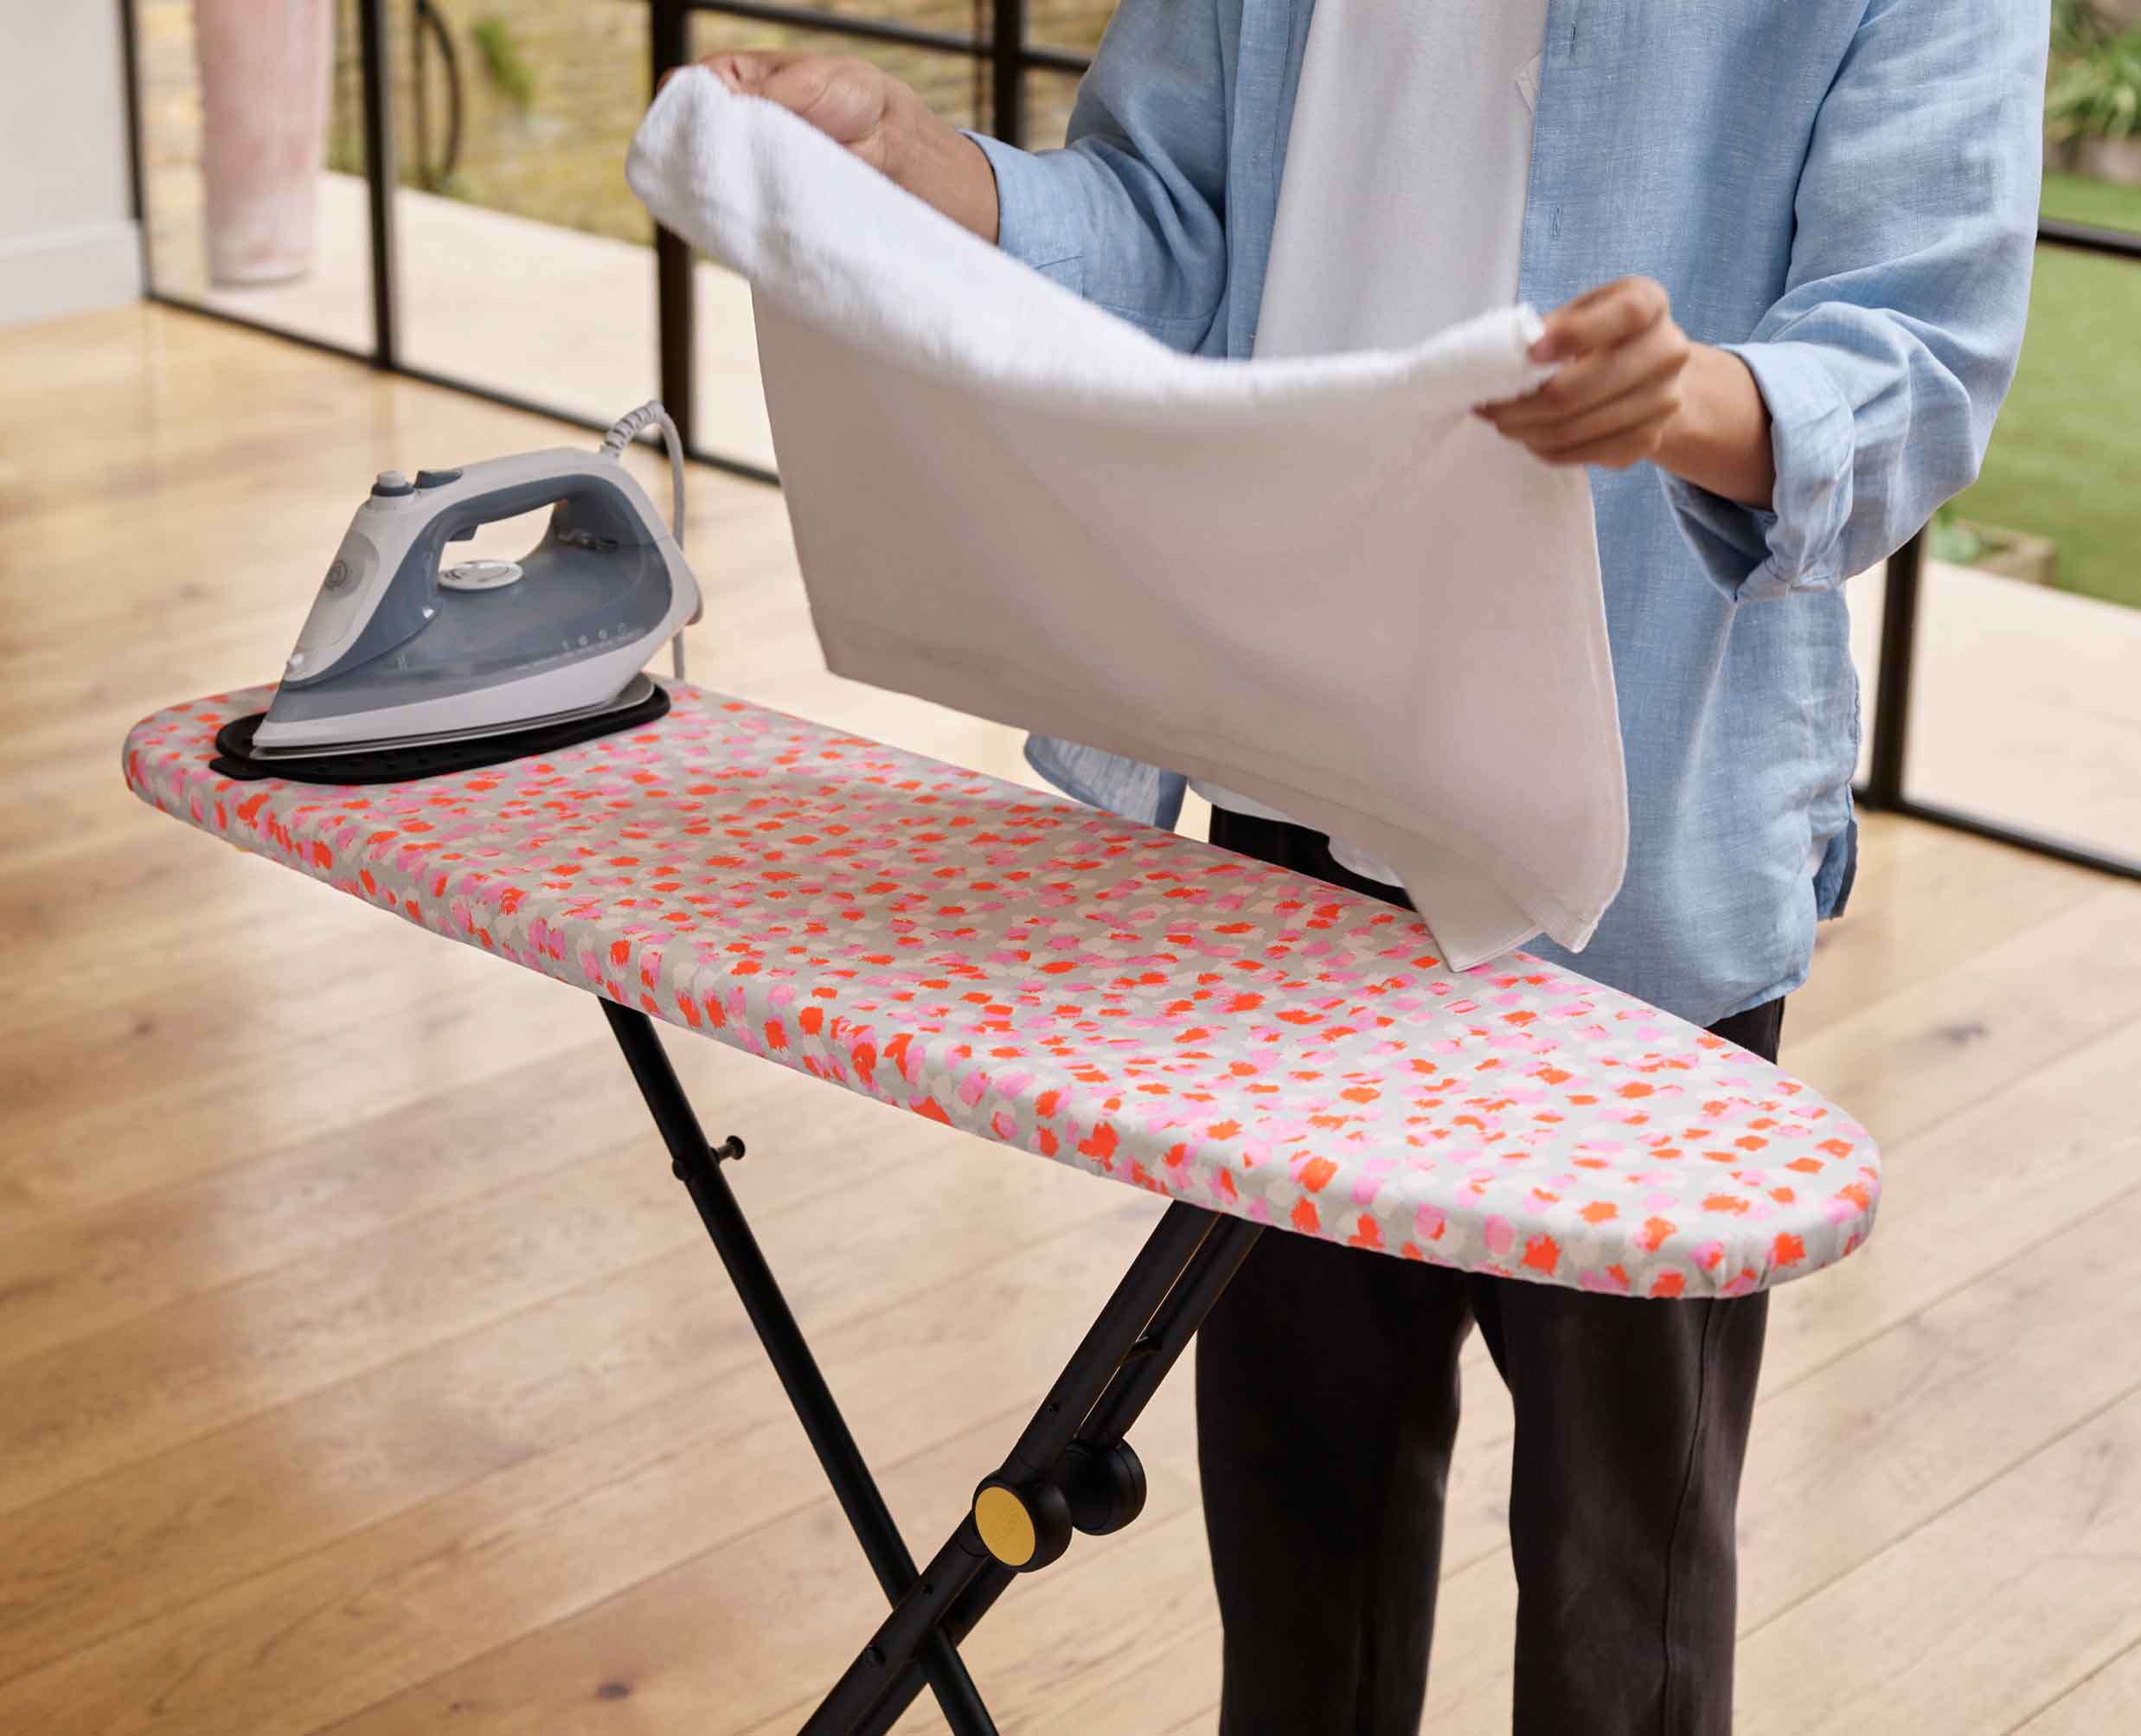 Glide Compact Easy-store Ironing Board - 50027 - Image 3